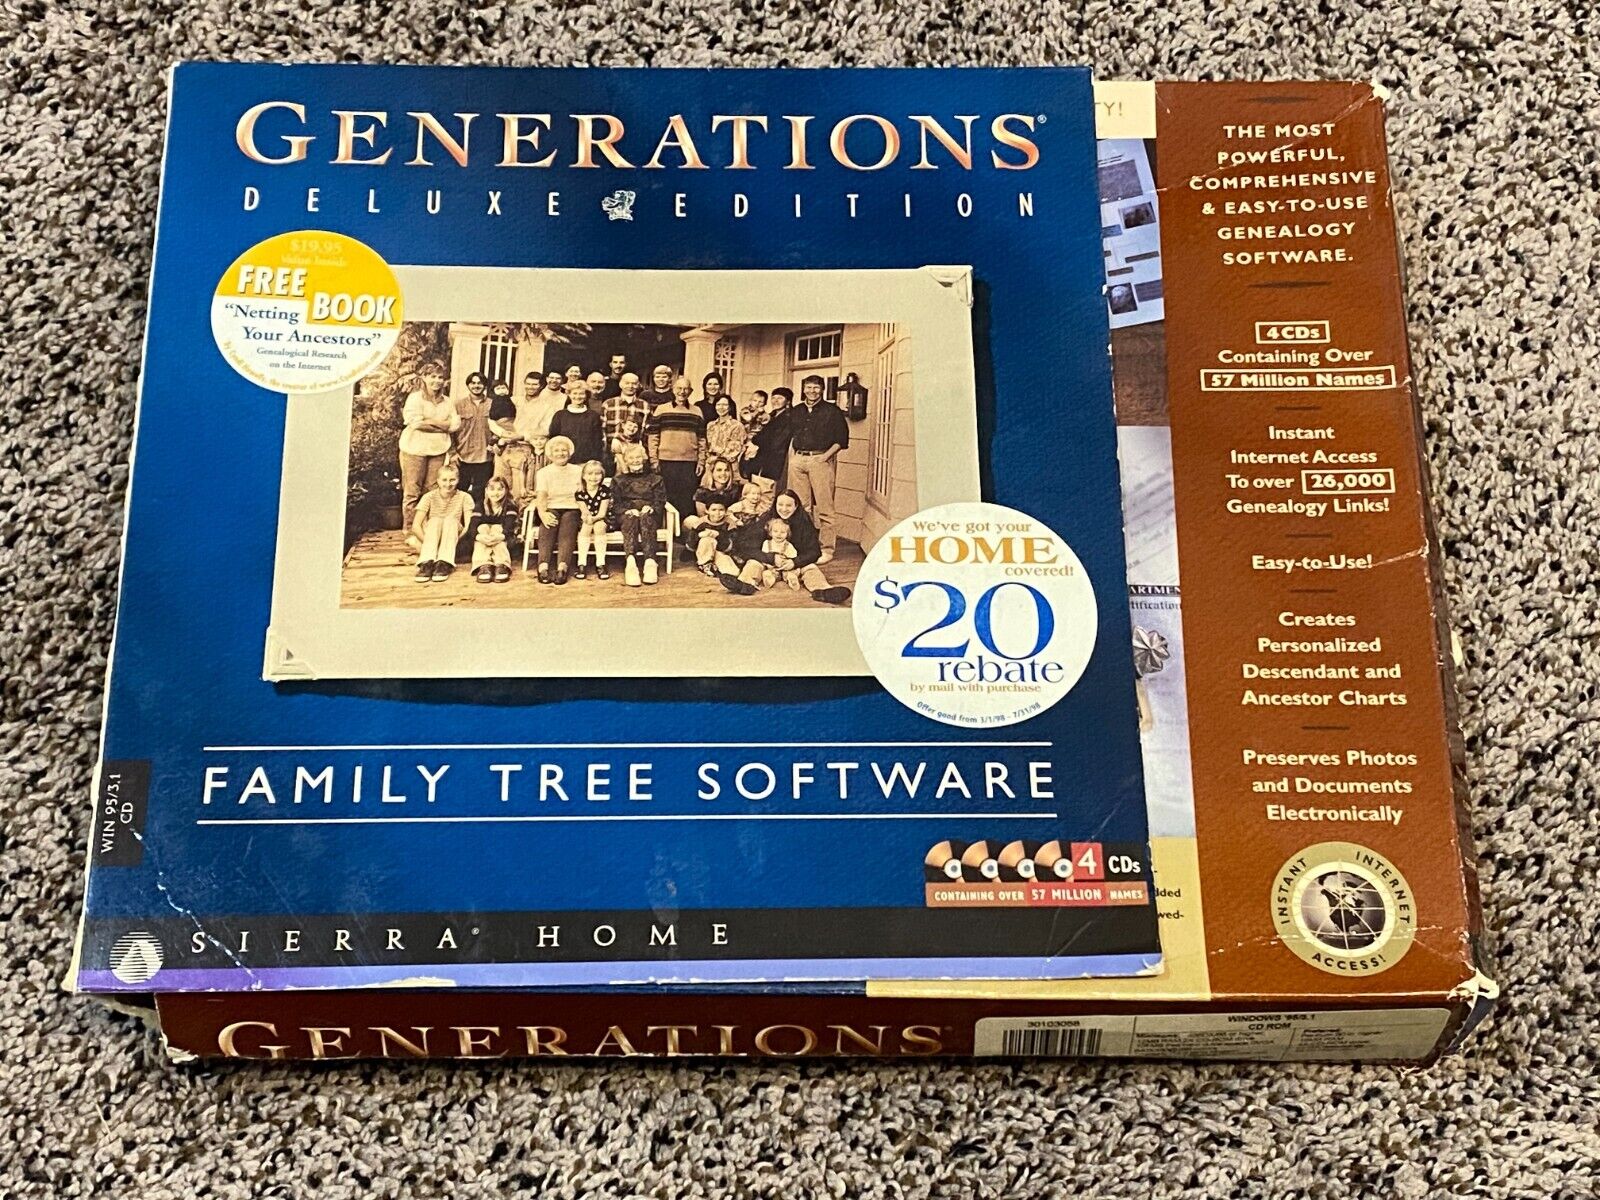 Sierra Home Generations Deluxe Edition Family Tree Software